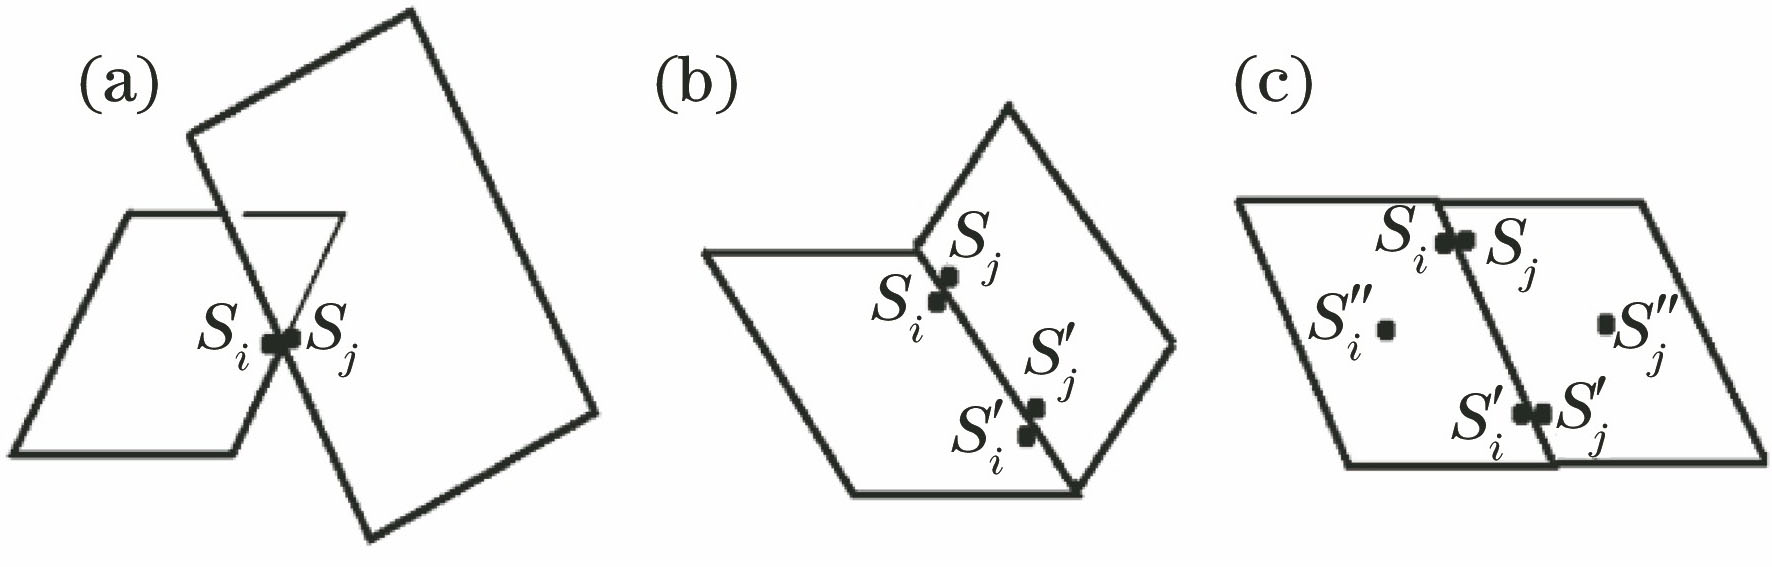 Image properties. (a) Connected structure; (b) co-linearity structure; (c) co-planarity structure